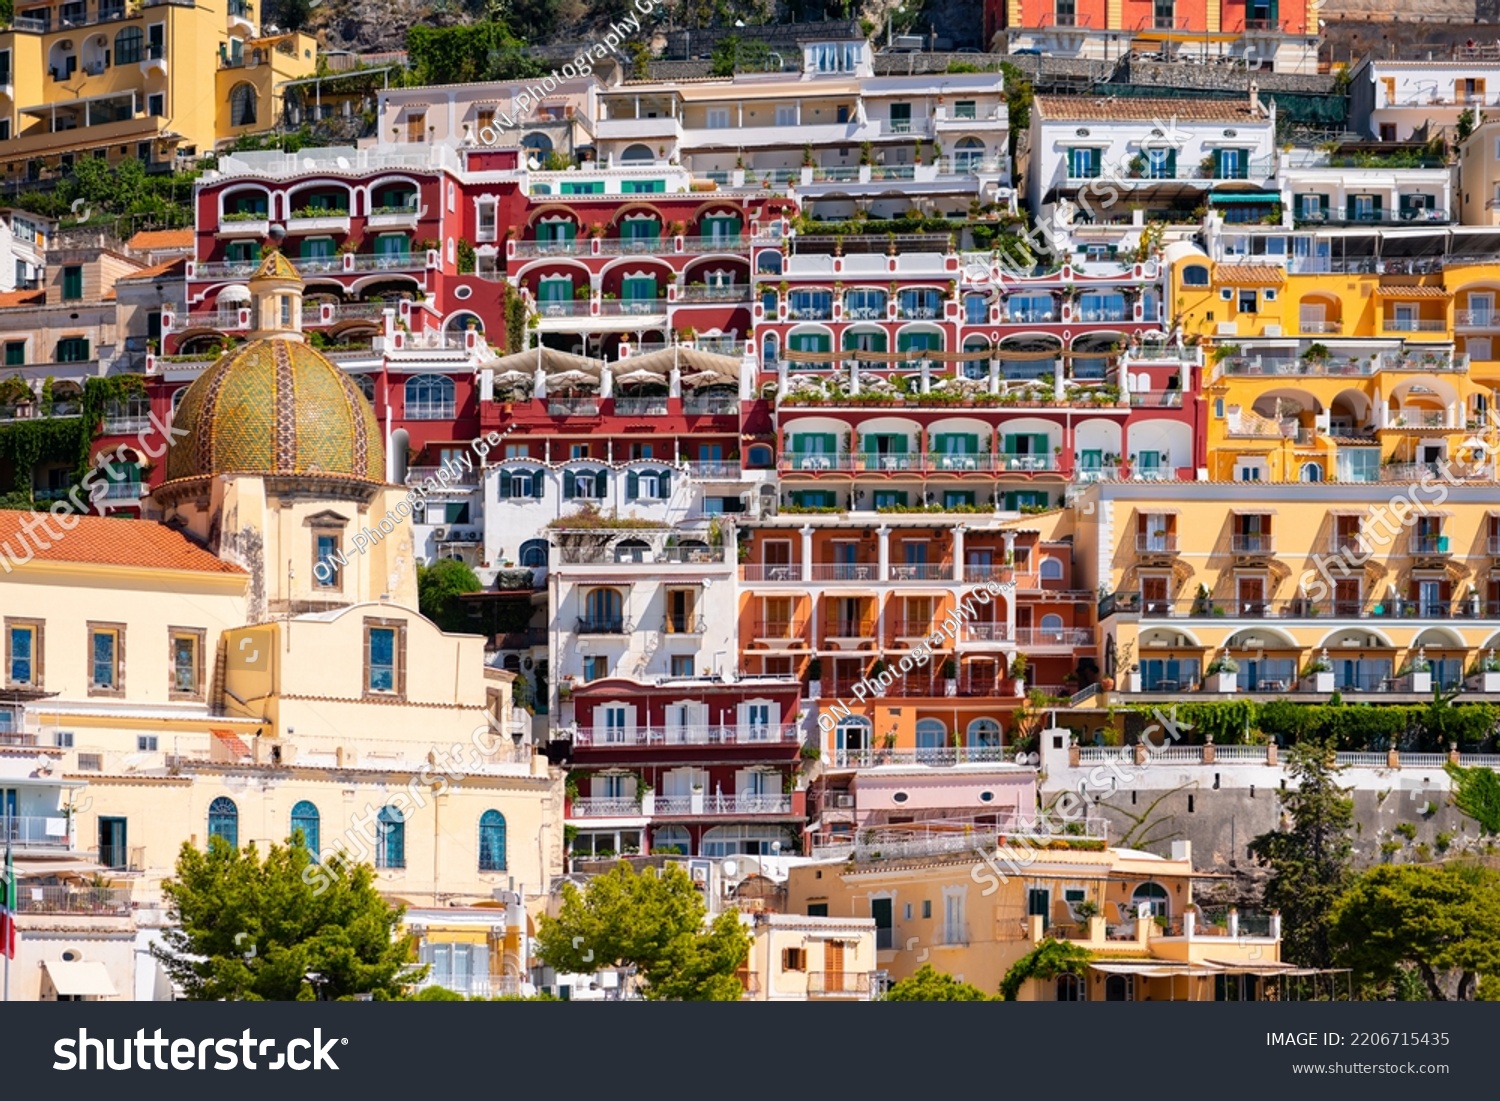 Positano on the famous Amalfi Coast in Campania Italy. Picturesque historic village with colorful houses and church built on the steep coastline. Summer atmosphere in popular tourist destination.  #2206715435